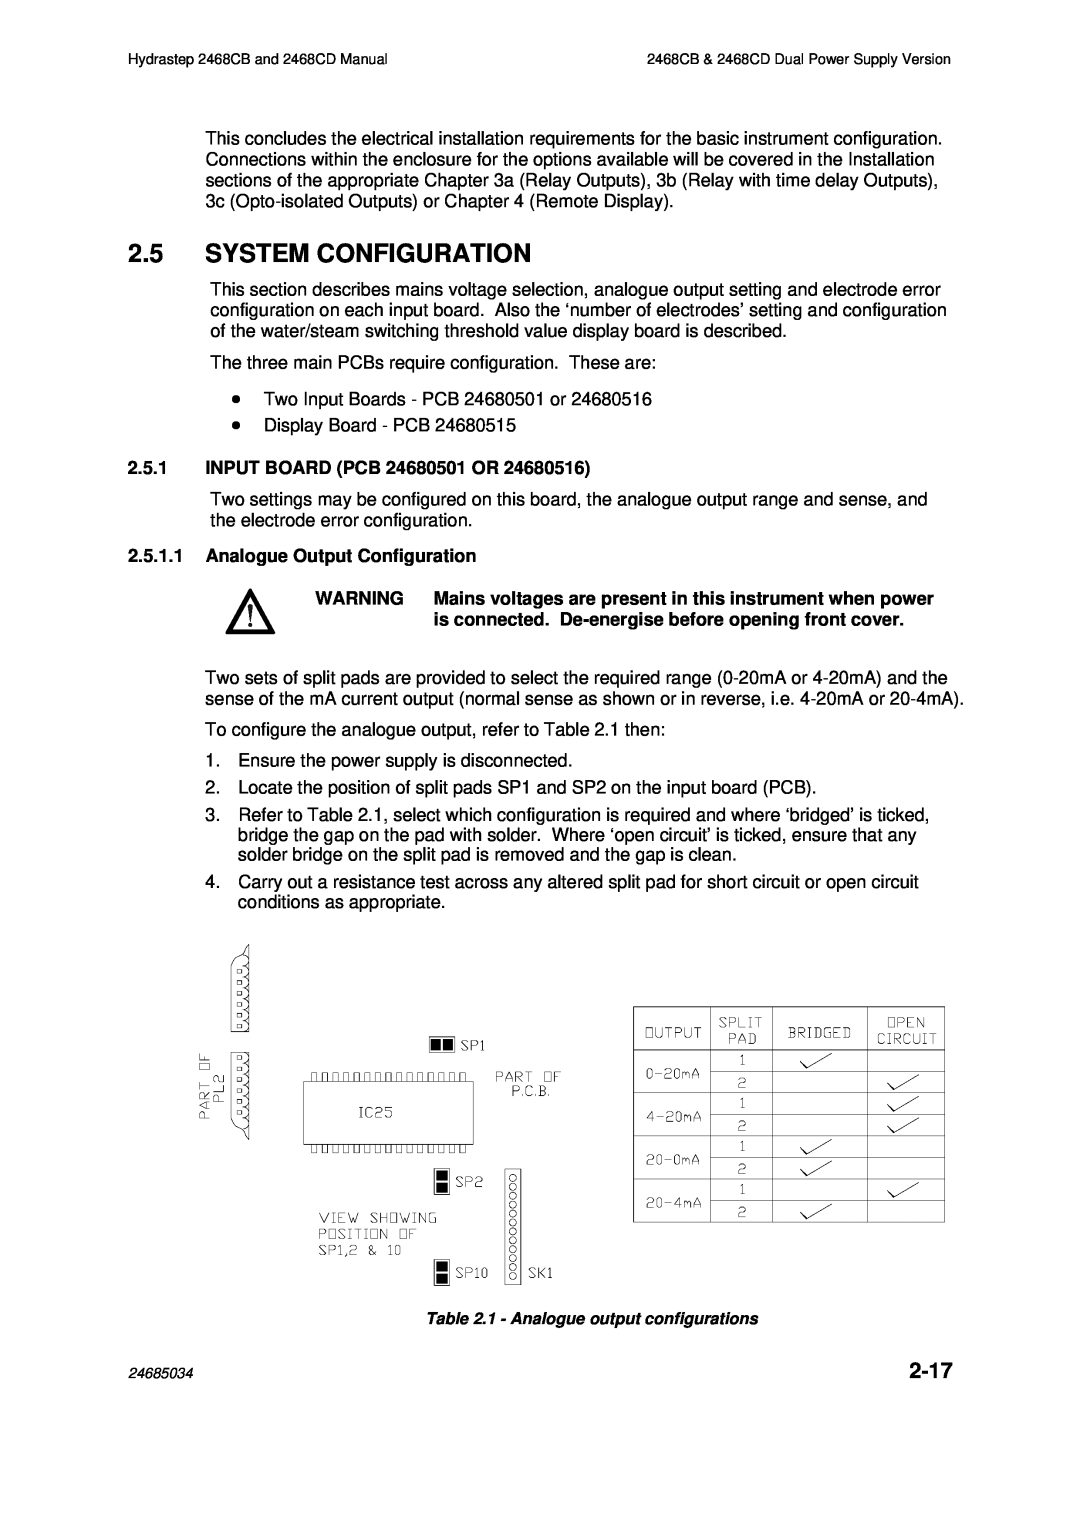 Emerson 2468CD manual 2.5SYSTEM CONFIGURATION, 2-17, 2.5.1INPUT BOARD PCB 24680501 OR, 2.5.1.1Analogue Output Configuration 